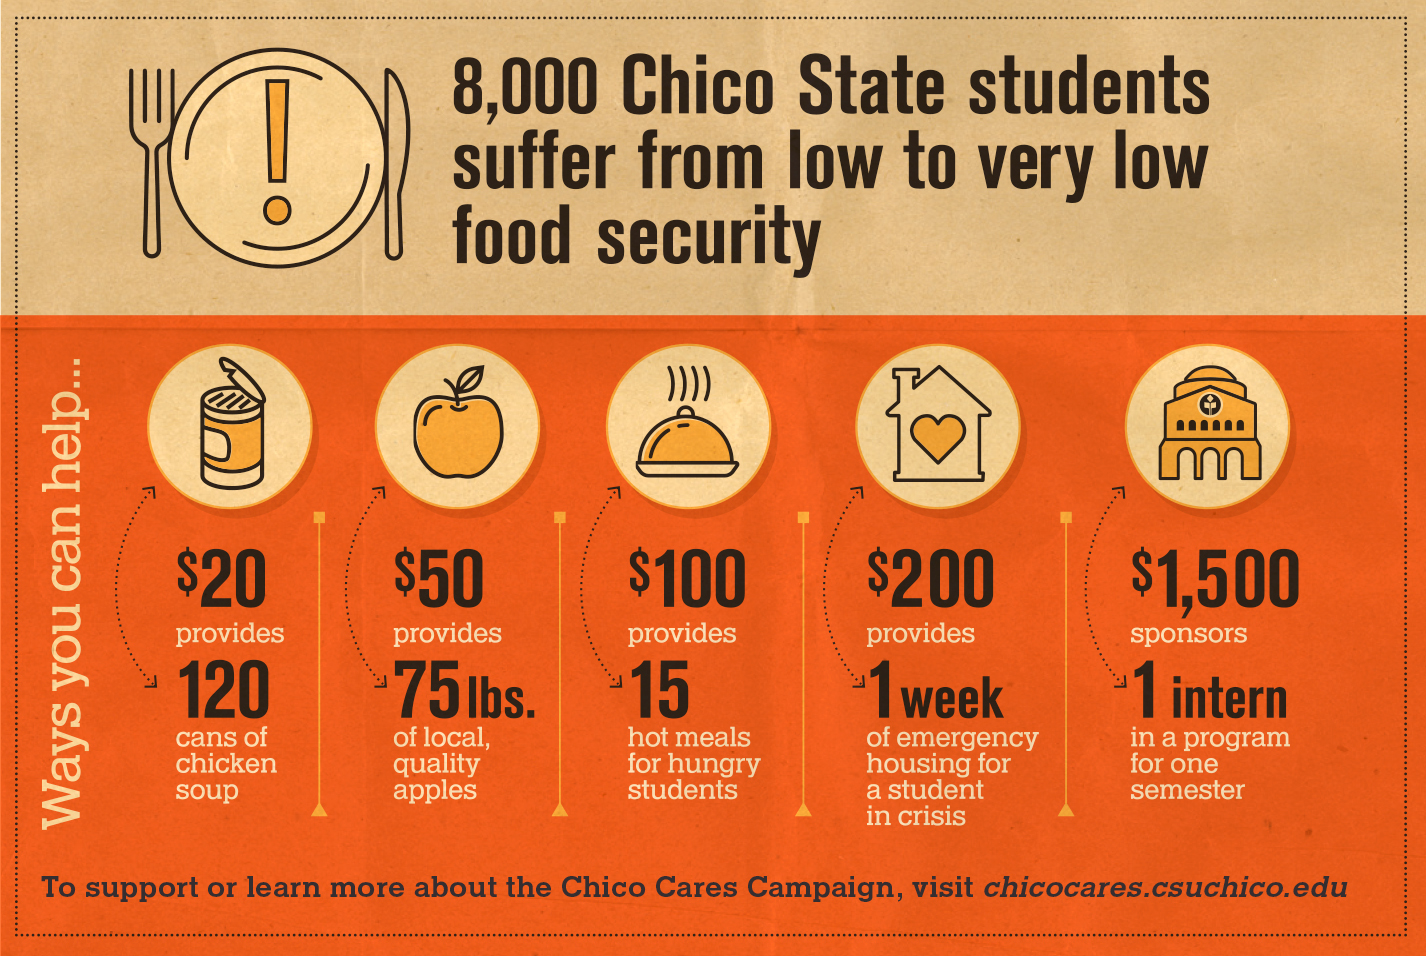 8,000 Chico State students suffer from low to very low food security. Learn ways to help by visiting http://chicocares.csuchico.edu